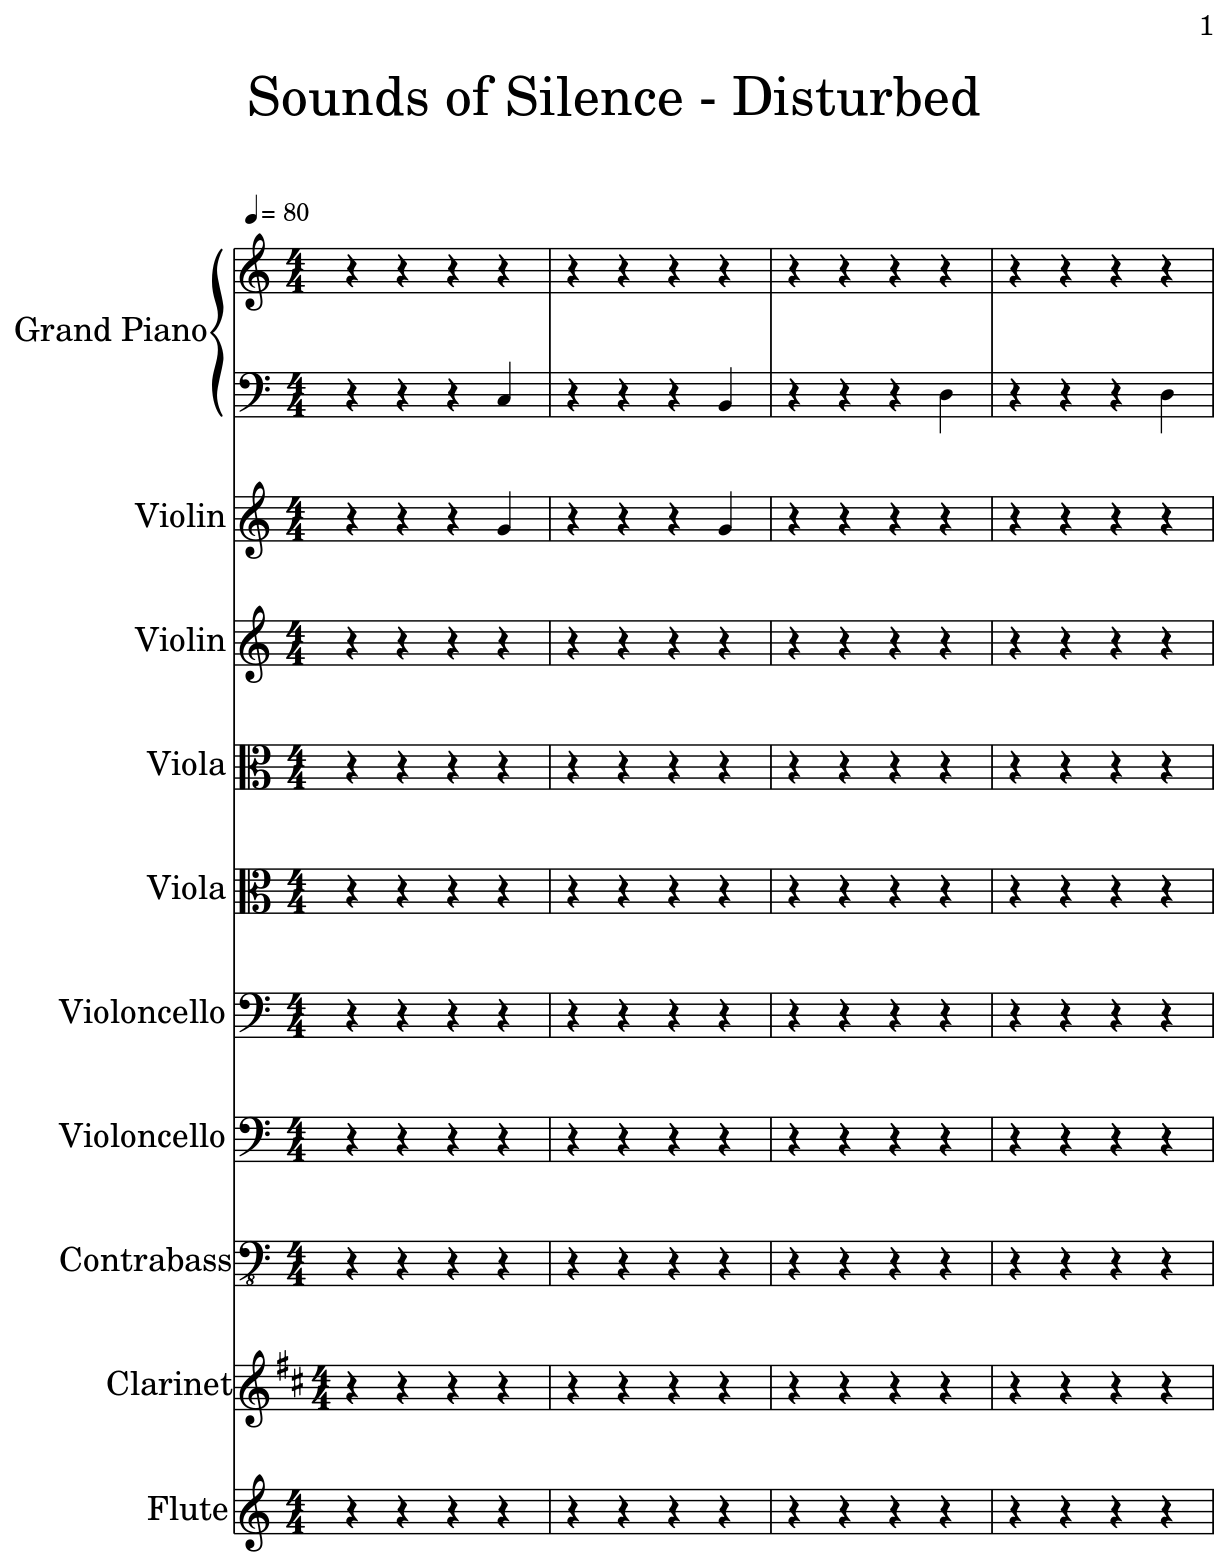 Sounds Of Silence Disturbed Sheet Music For Piano Violin Viola Cello Contrabass Clarinet Flute Alto Saxophone Horn In F Trombone Trumpet Acoustic Guitar Glockenspiel